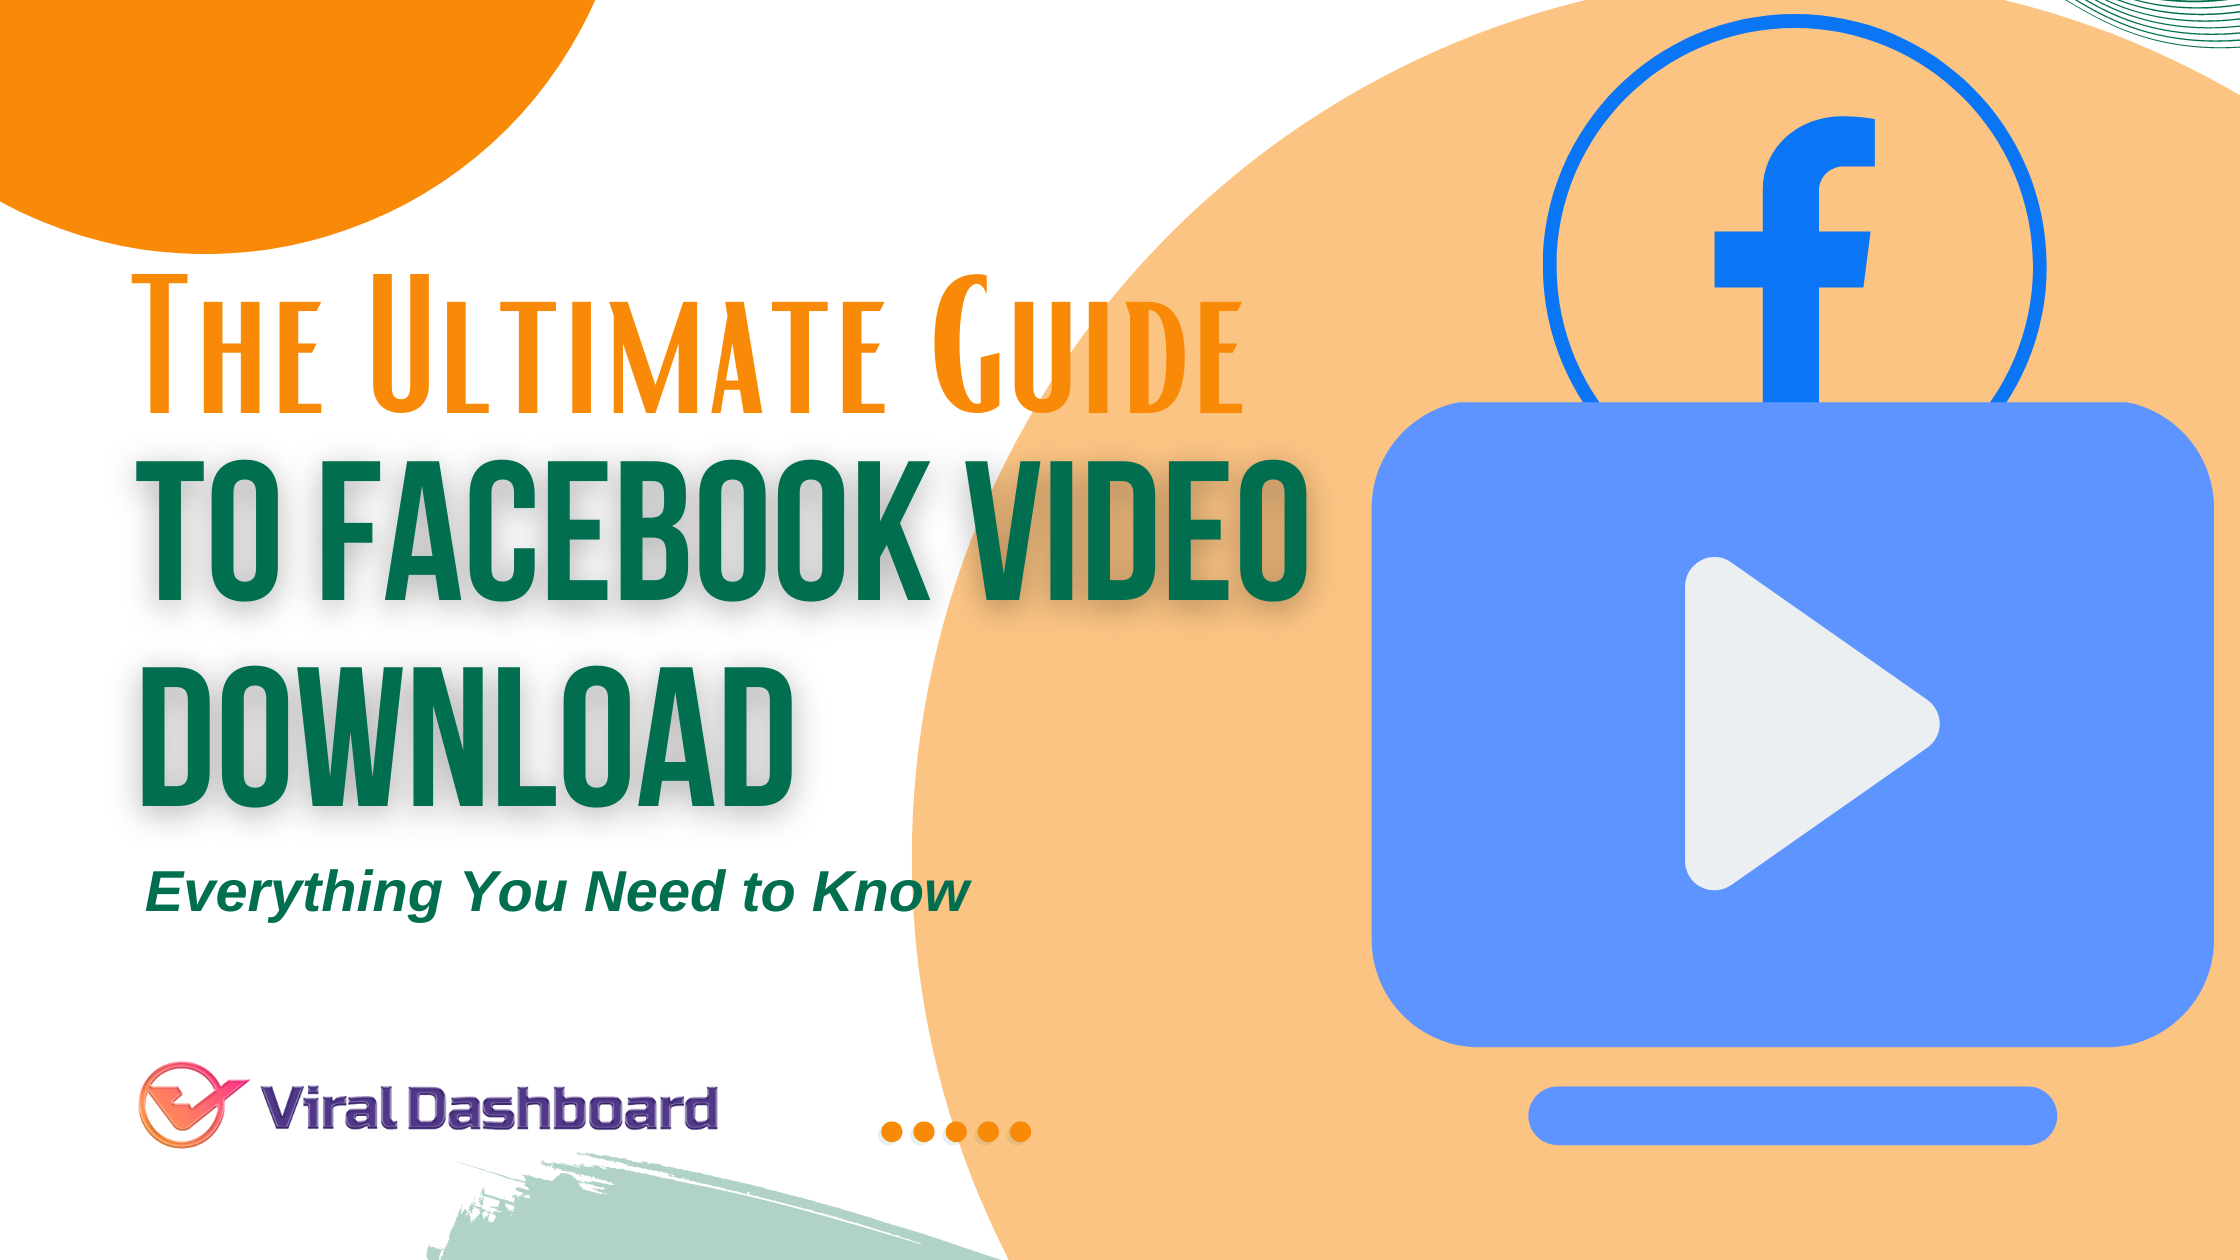 The Ultimate Guide to Facebook Video Download: Everything You Need to Know